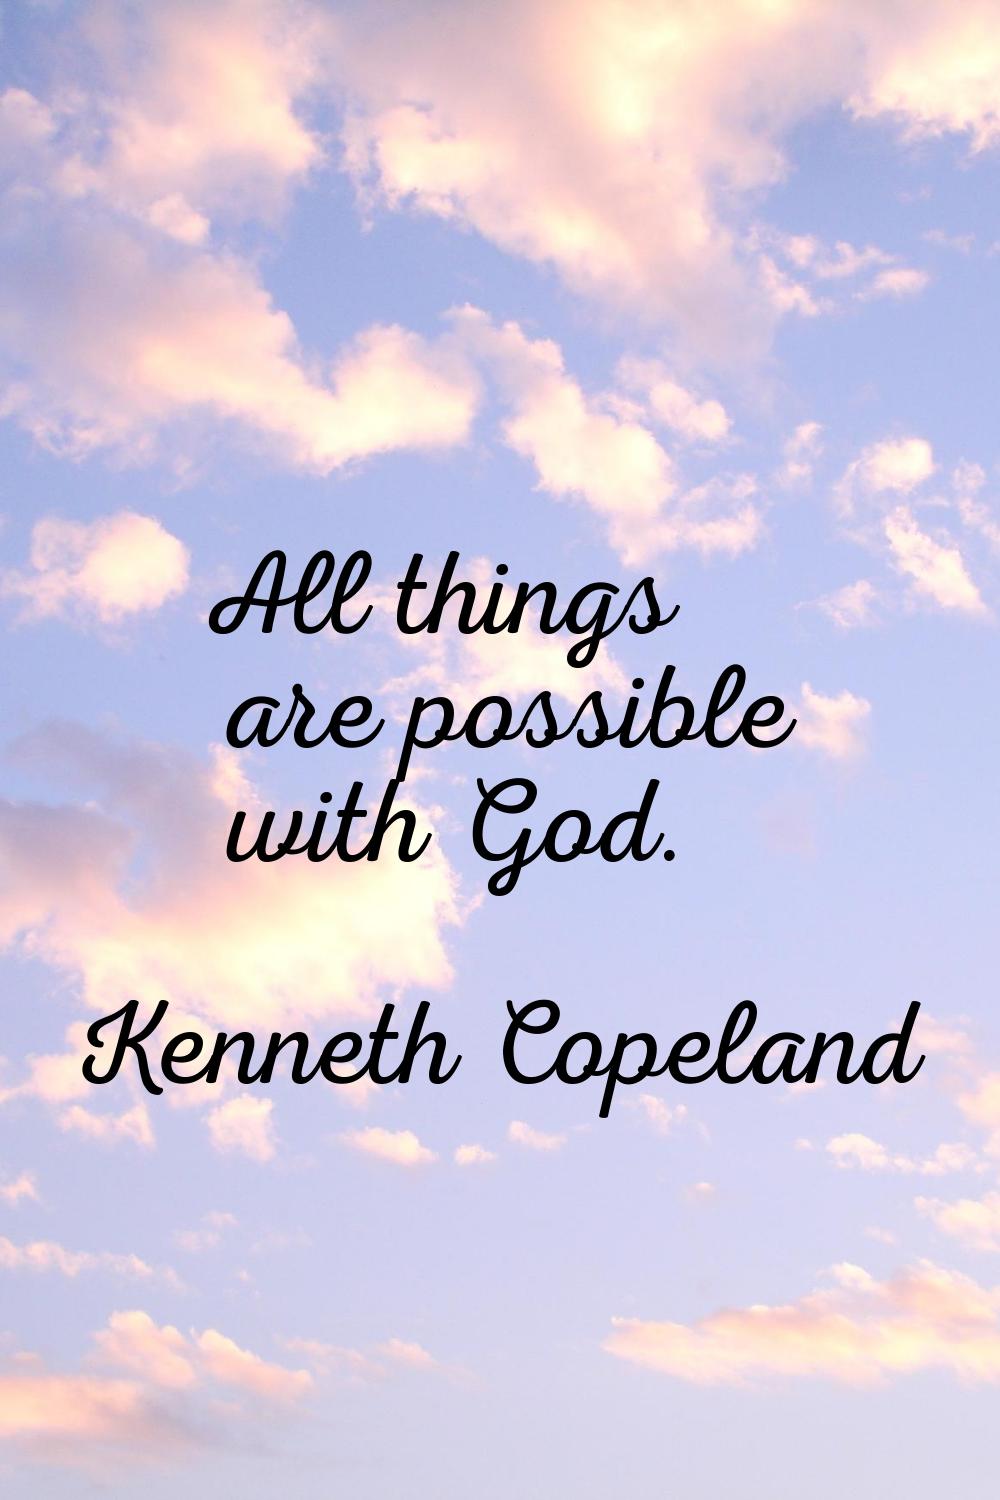 All things are possible with God.